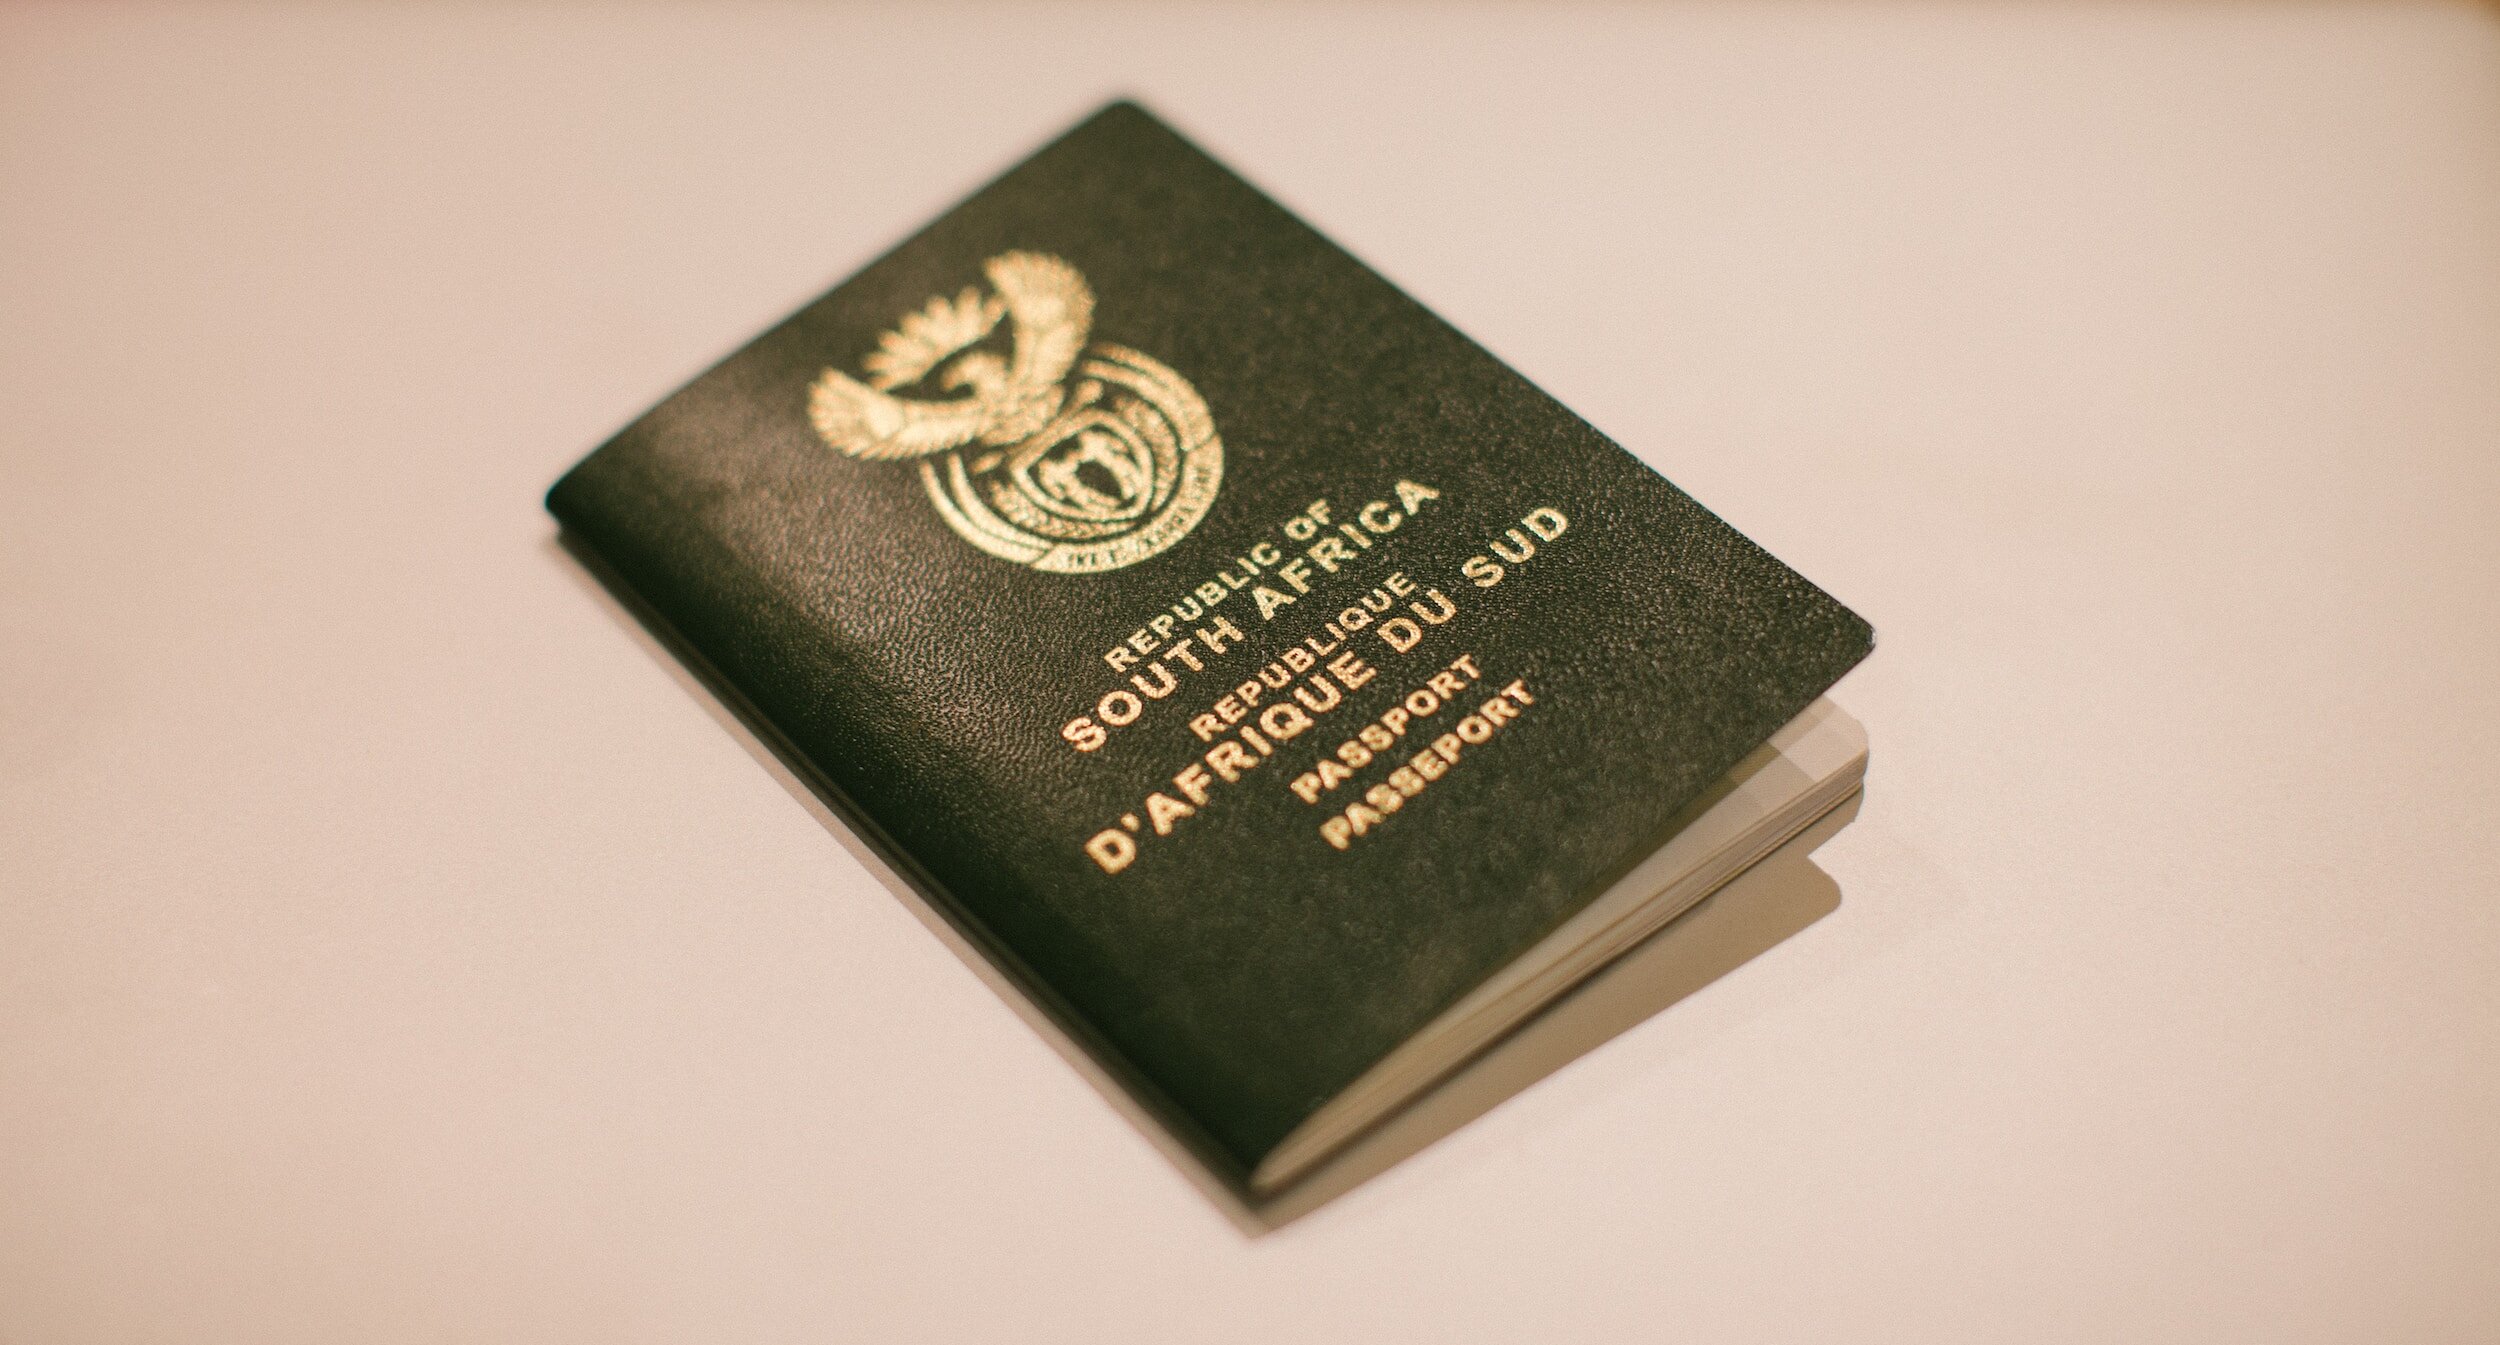 Recent changes to the South African Dual Nationality law